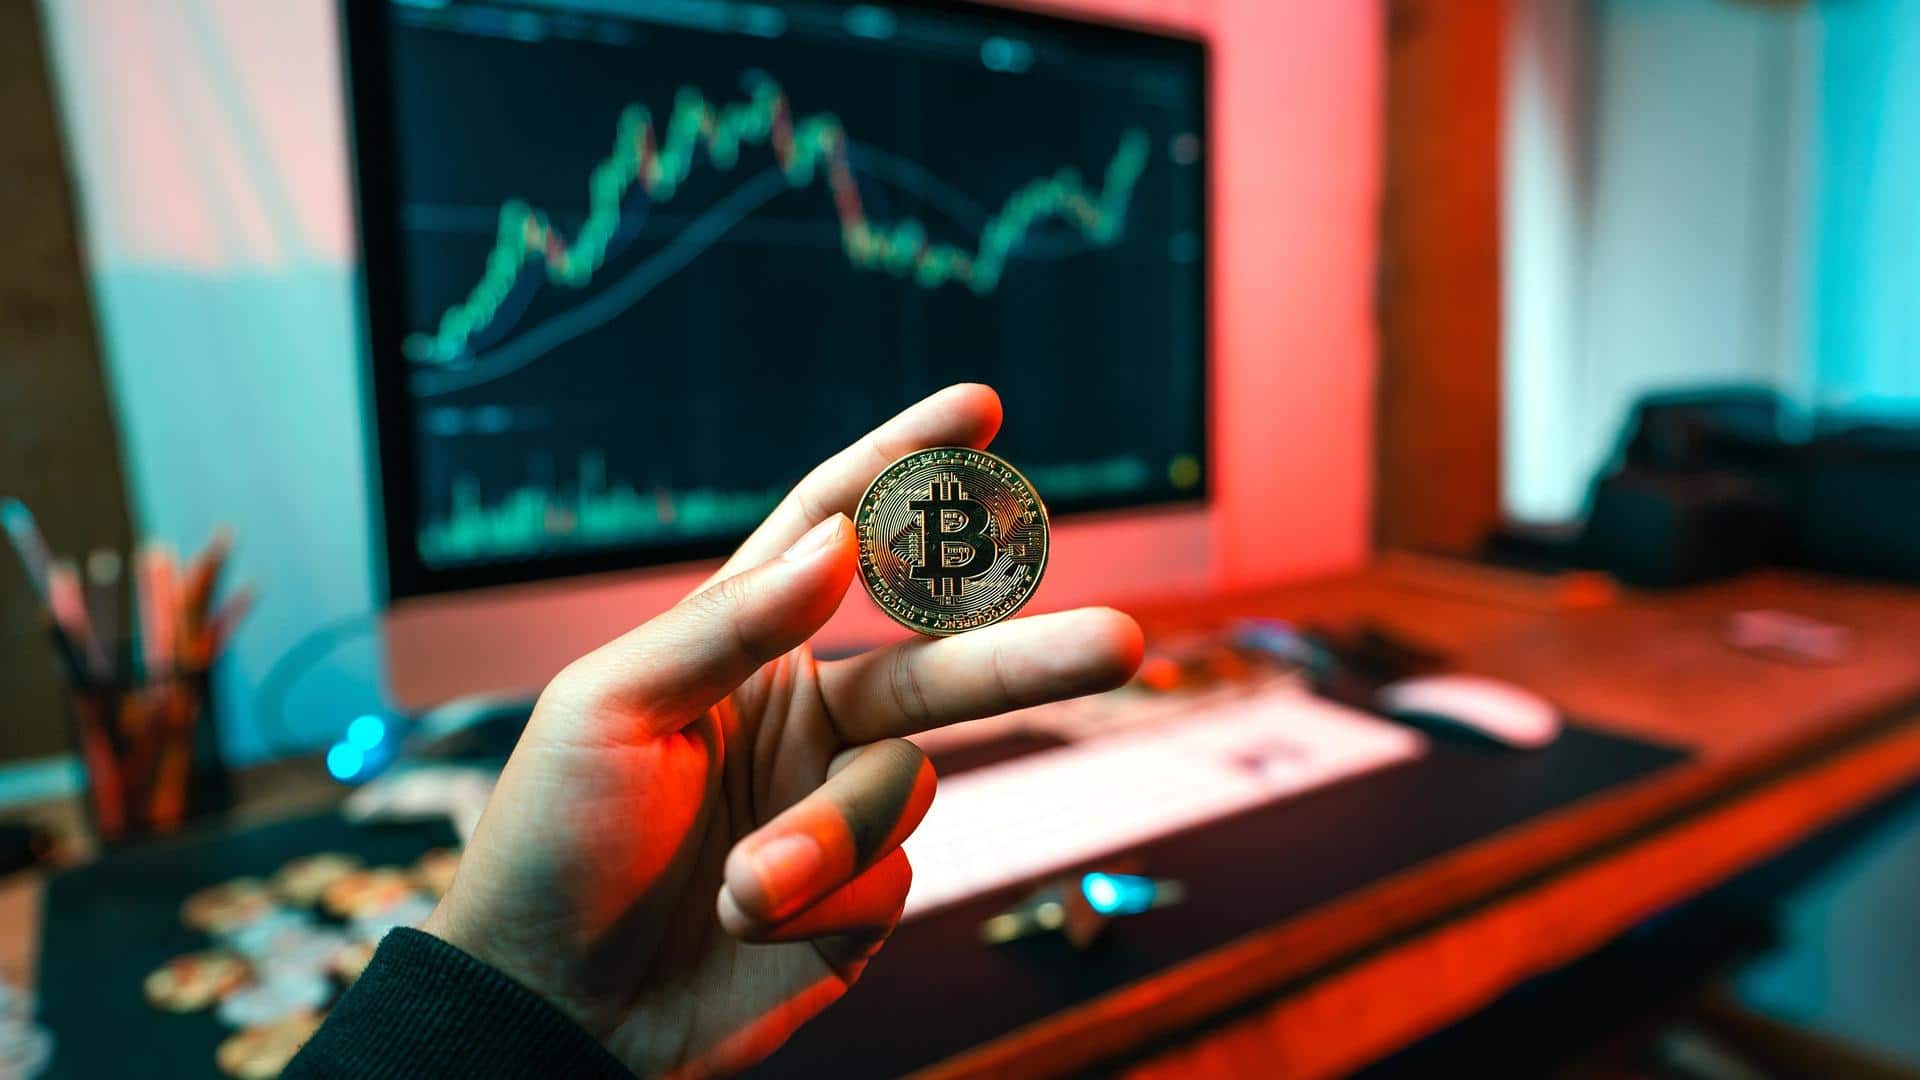 Cryptocurrency prices: Check today's rates of Bitcoin, Dogecoin, Tether, Ethereum